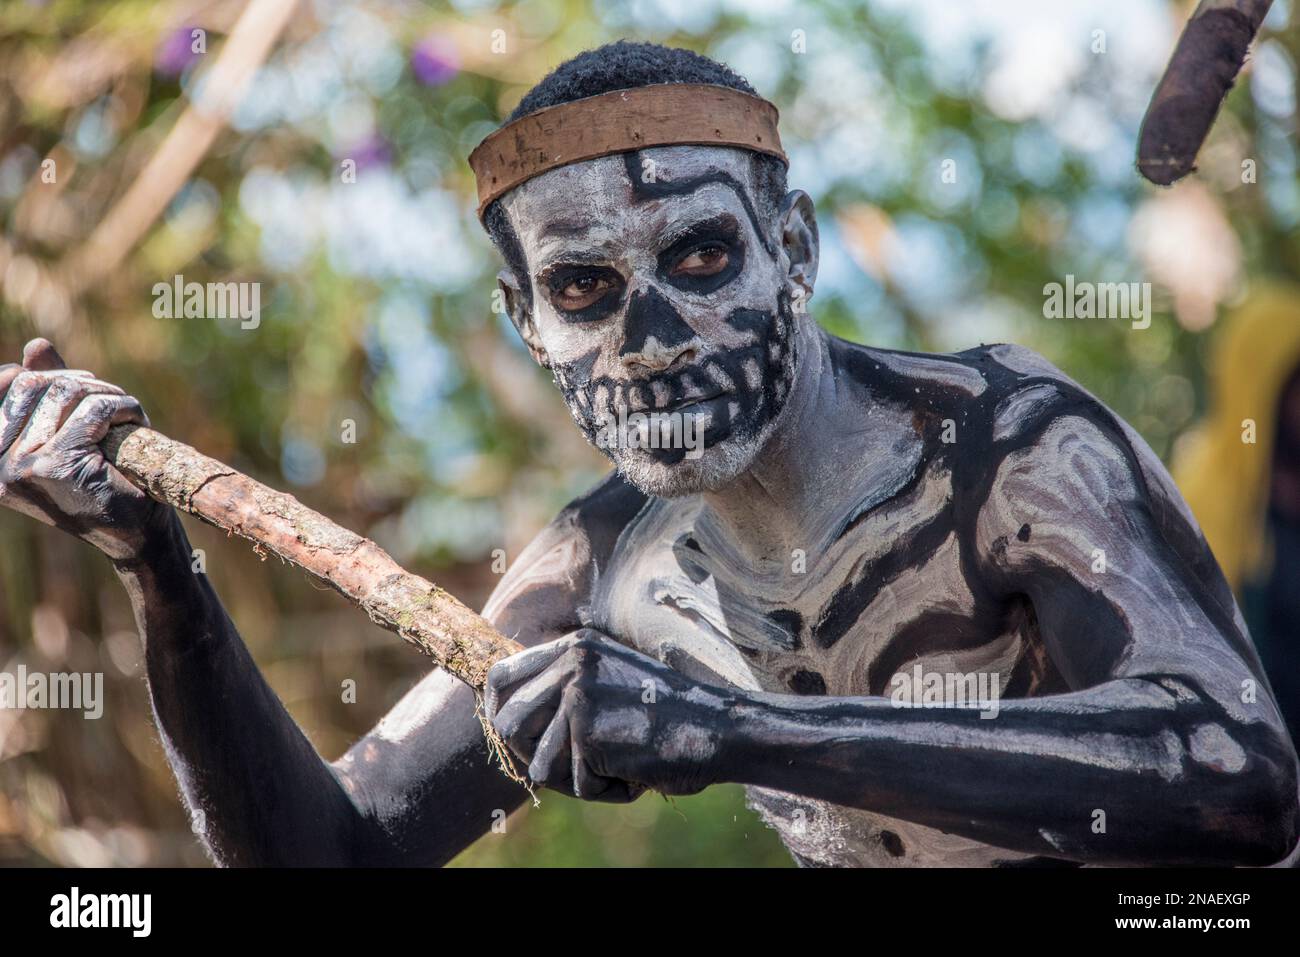 Bone men from Minima Village in Chimbu province, doing the Omo Masalai Dance—a spirit dance. They participate in a Sing Sing, a gathering of tribes or Stock Photo